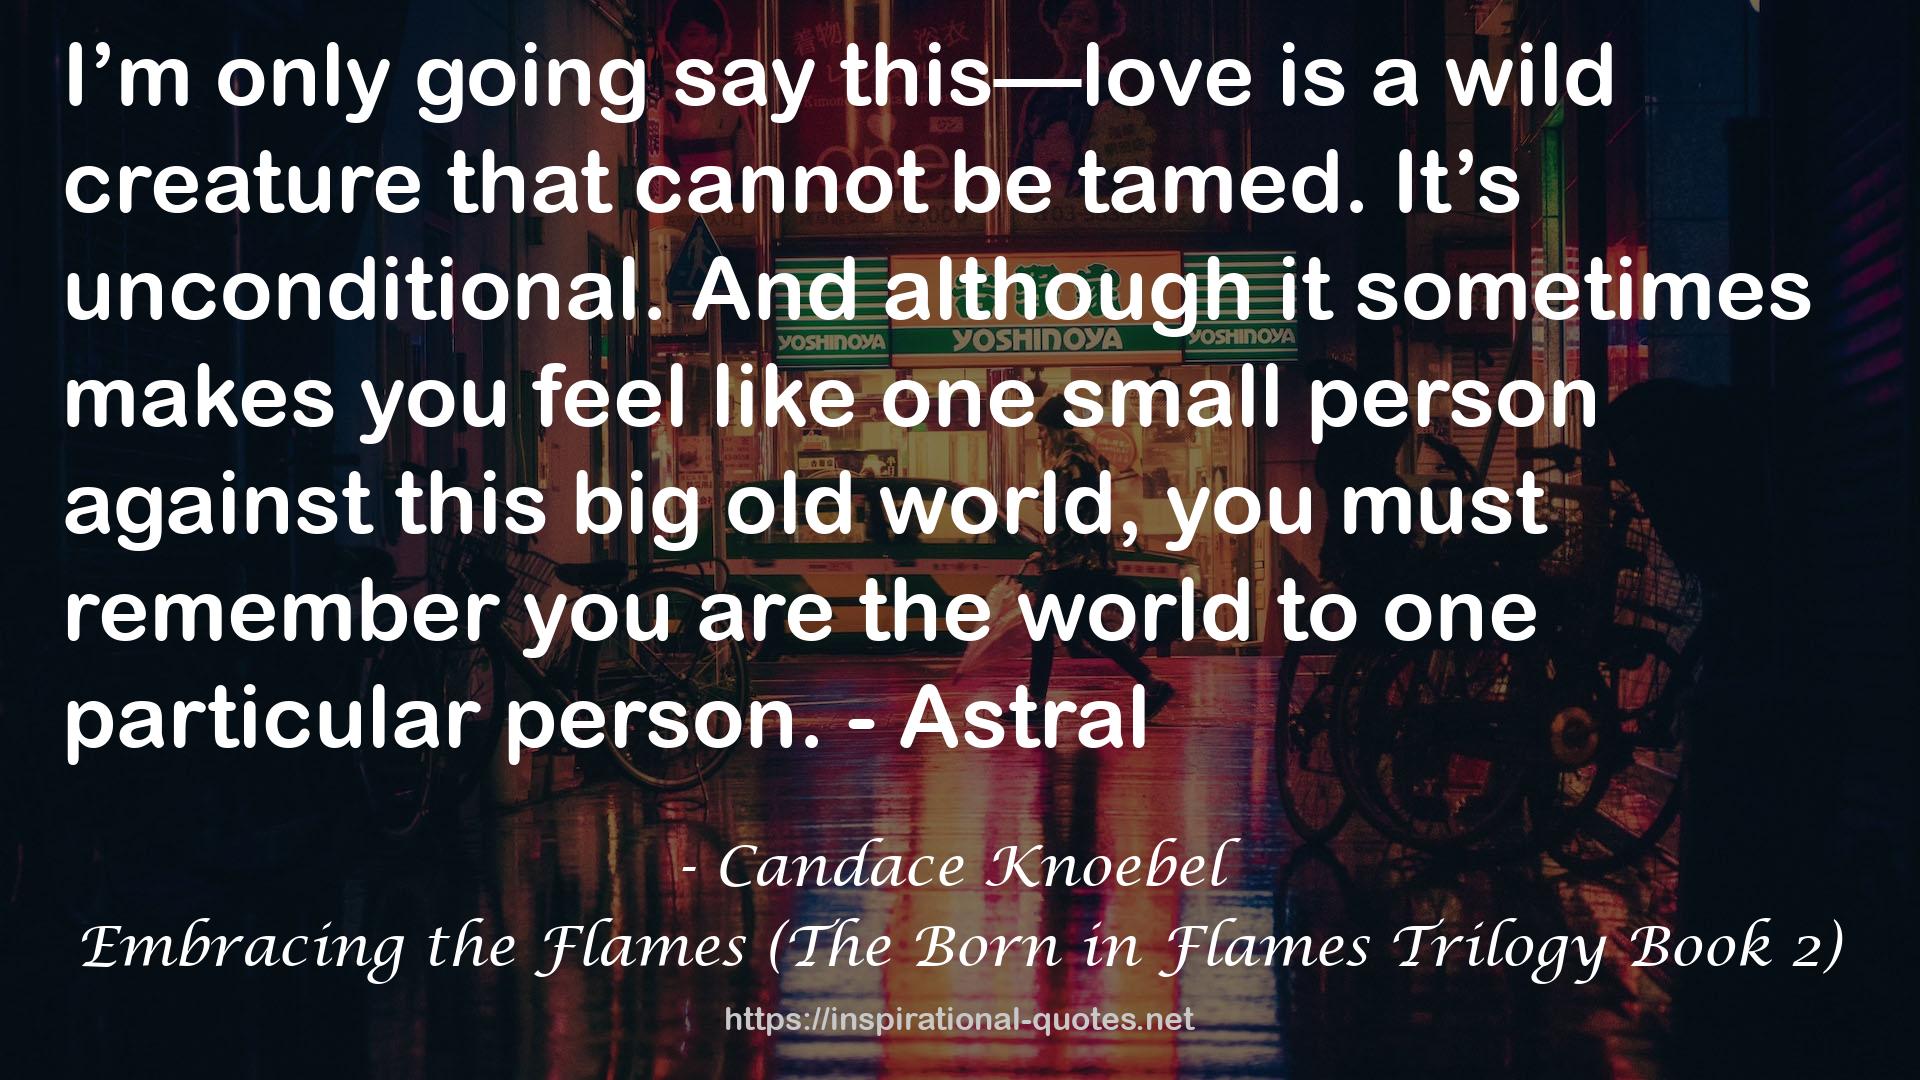 Embracing the Flames (The Born in Flames Trilogy Book 2) QUOTES